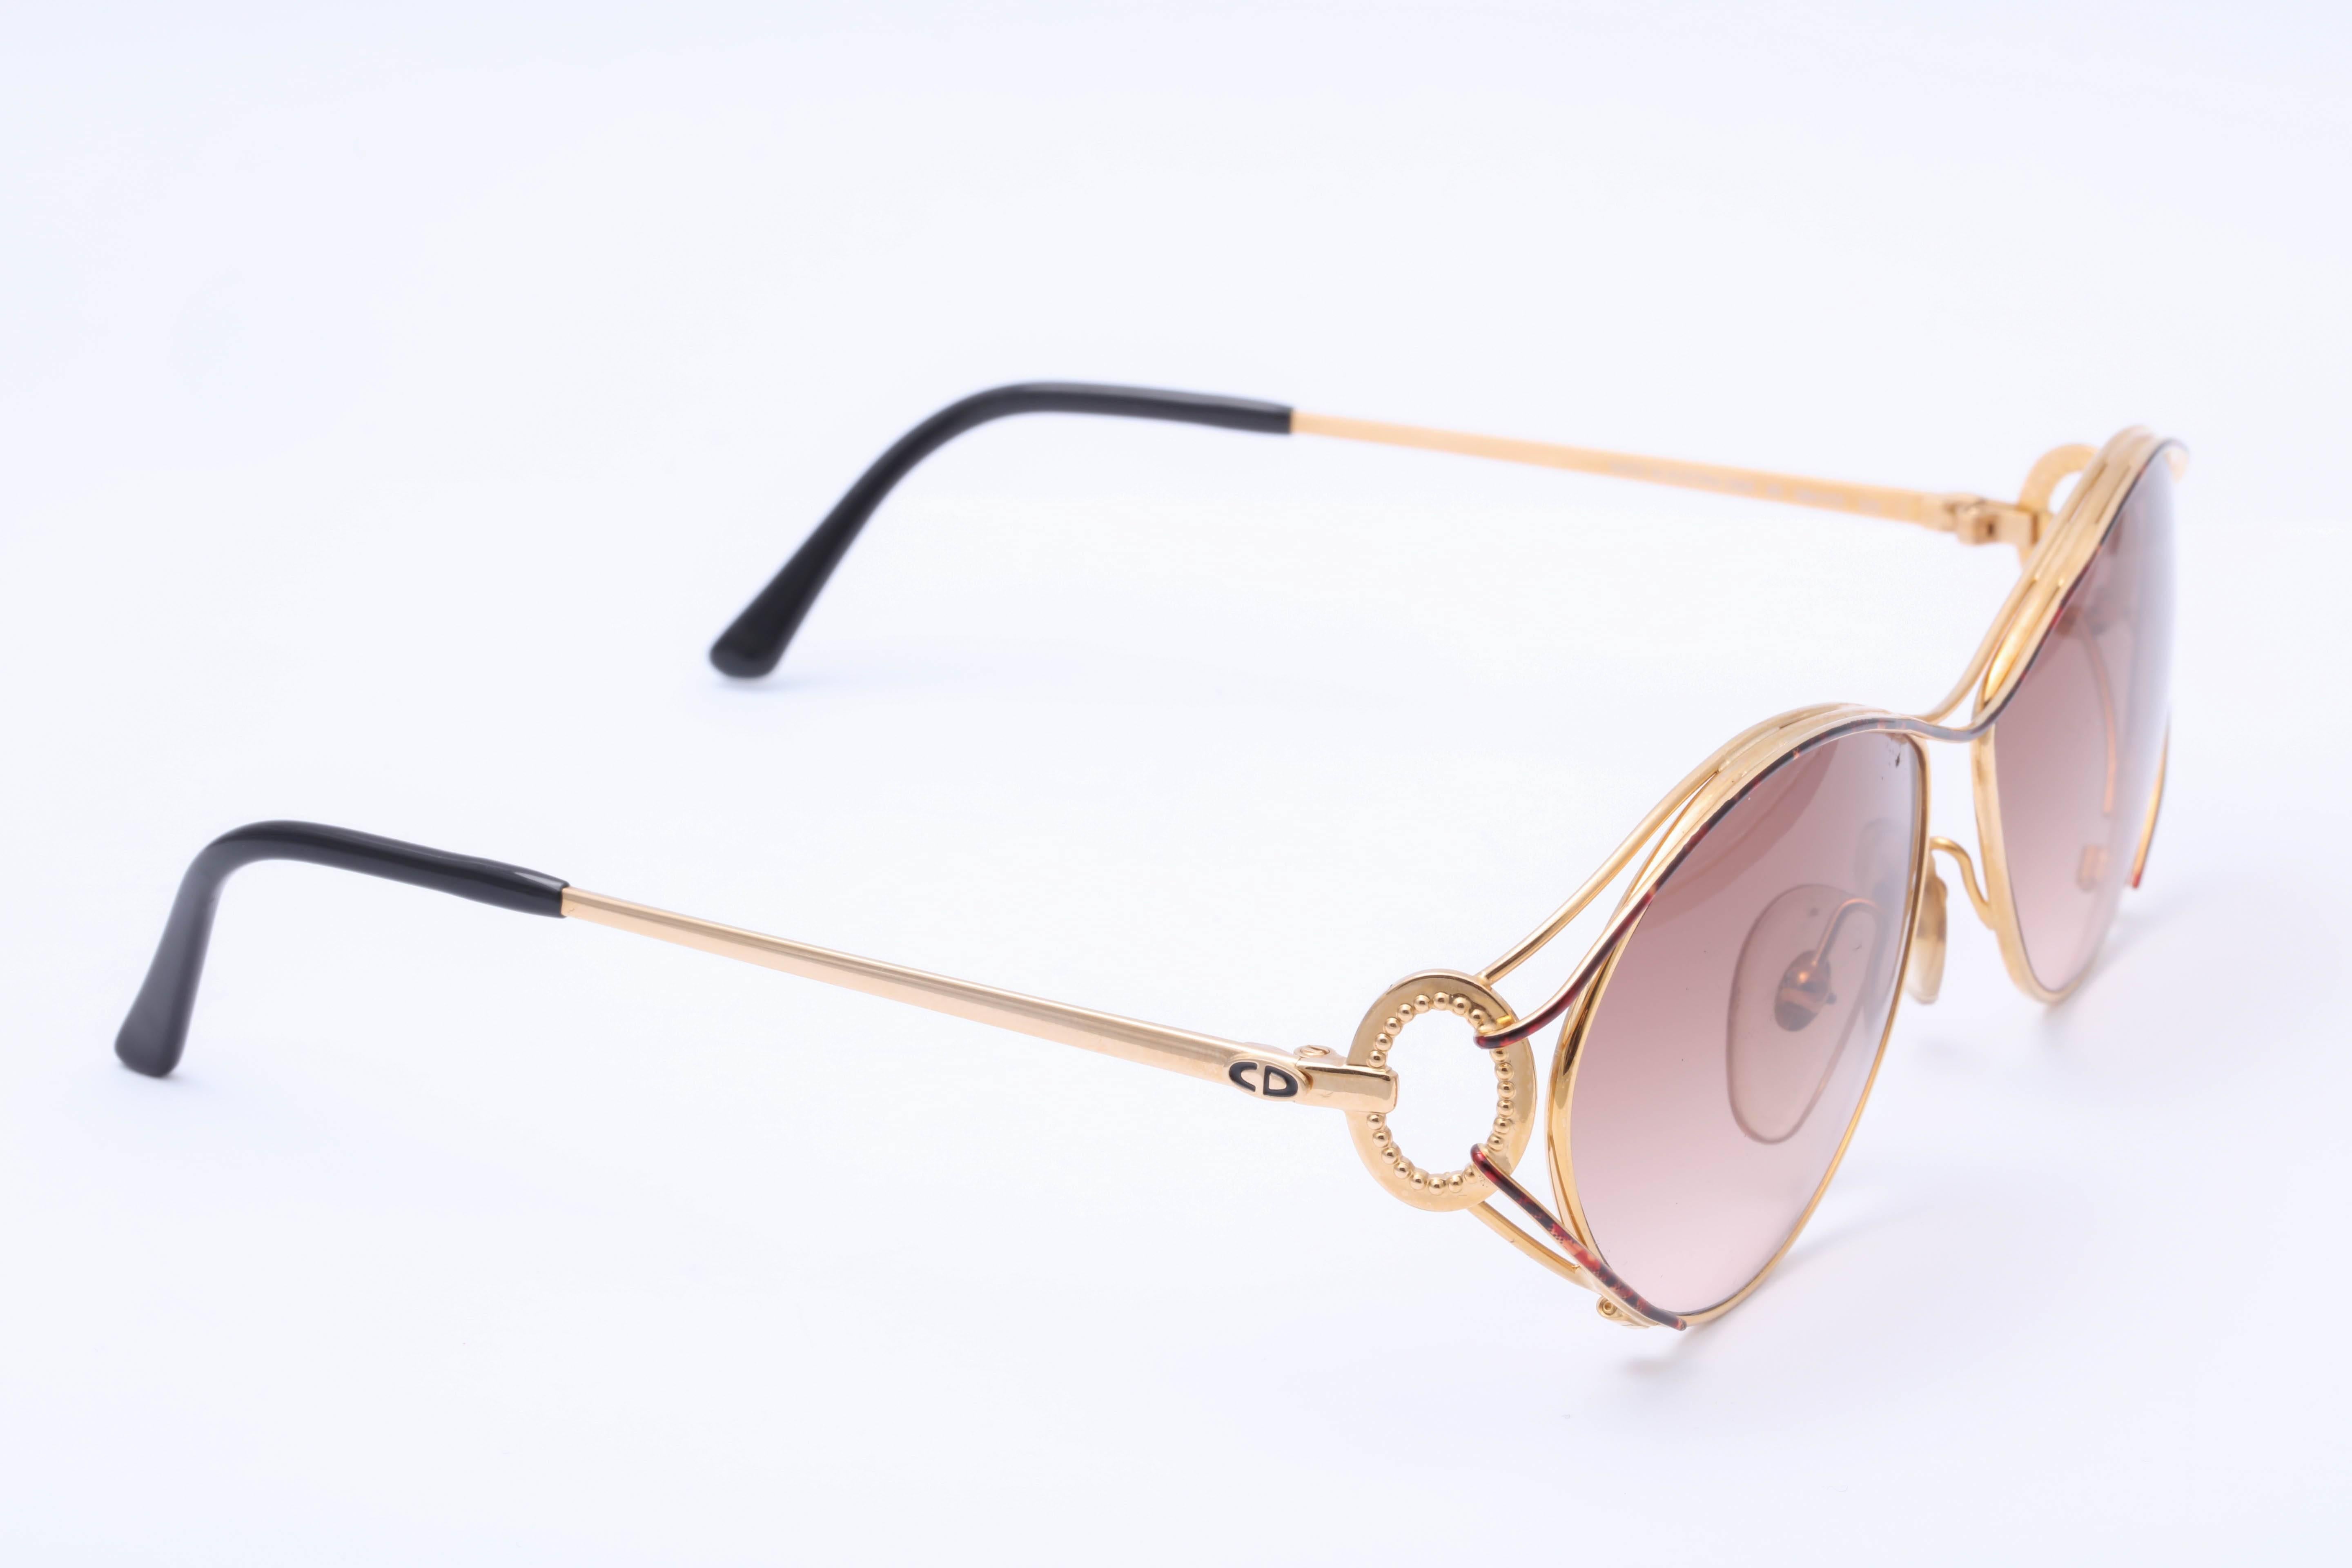 Vintage Christian Dior Sunglasses 2665 In Excellent Condition For Sale In Chicago, IL